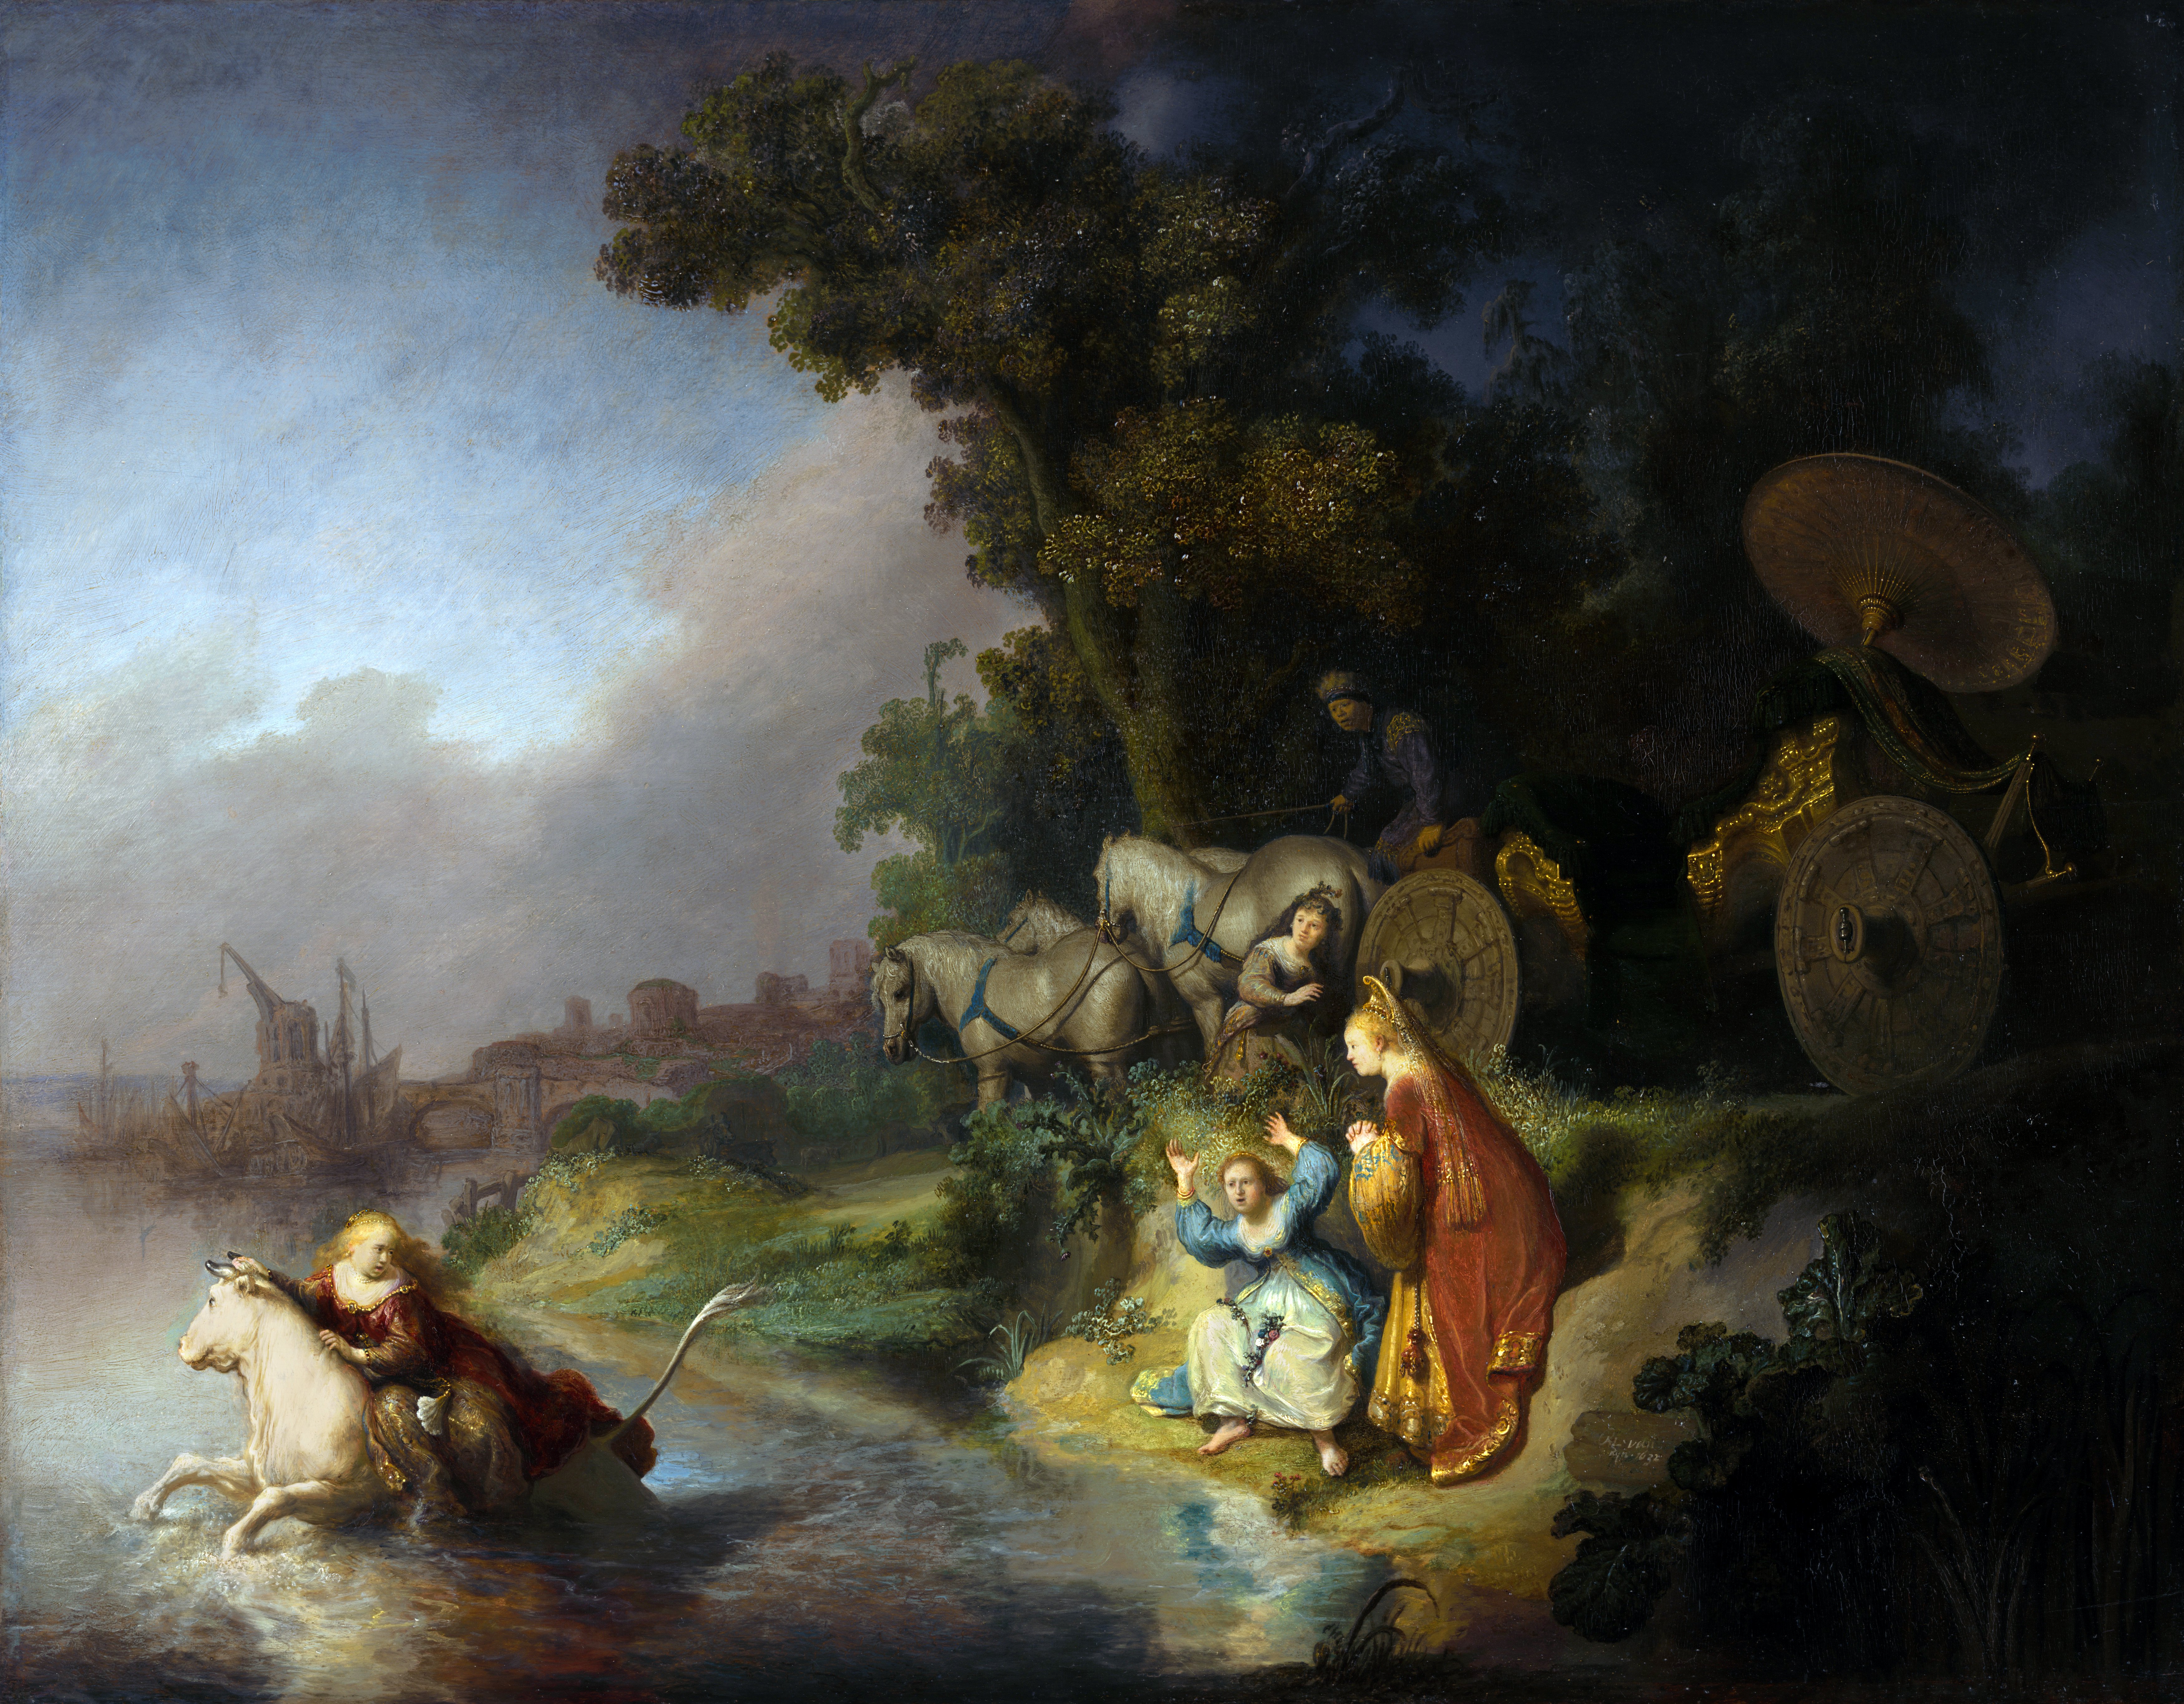 Rembrandt_Abduction_of_Europa.jpg